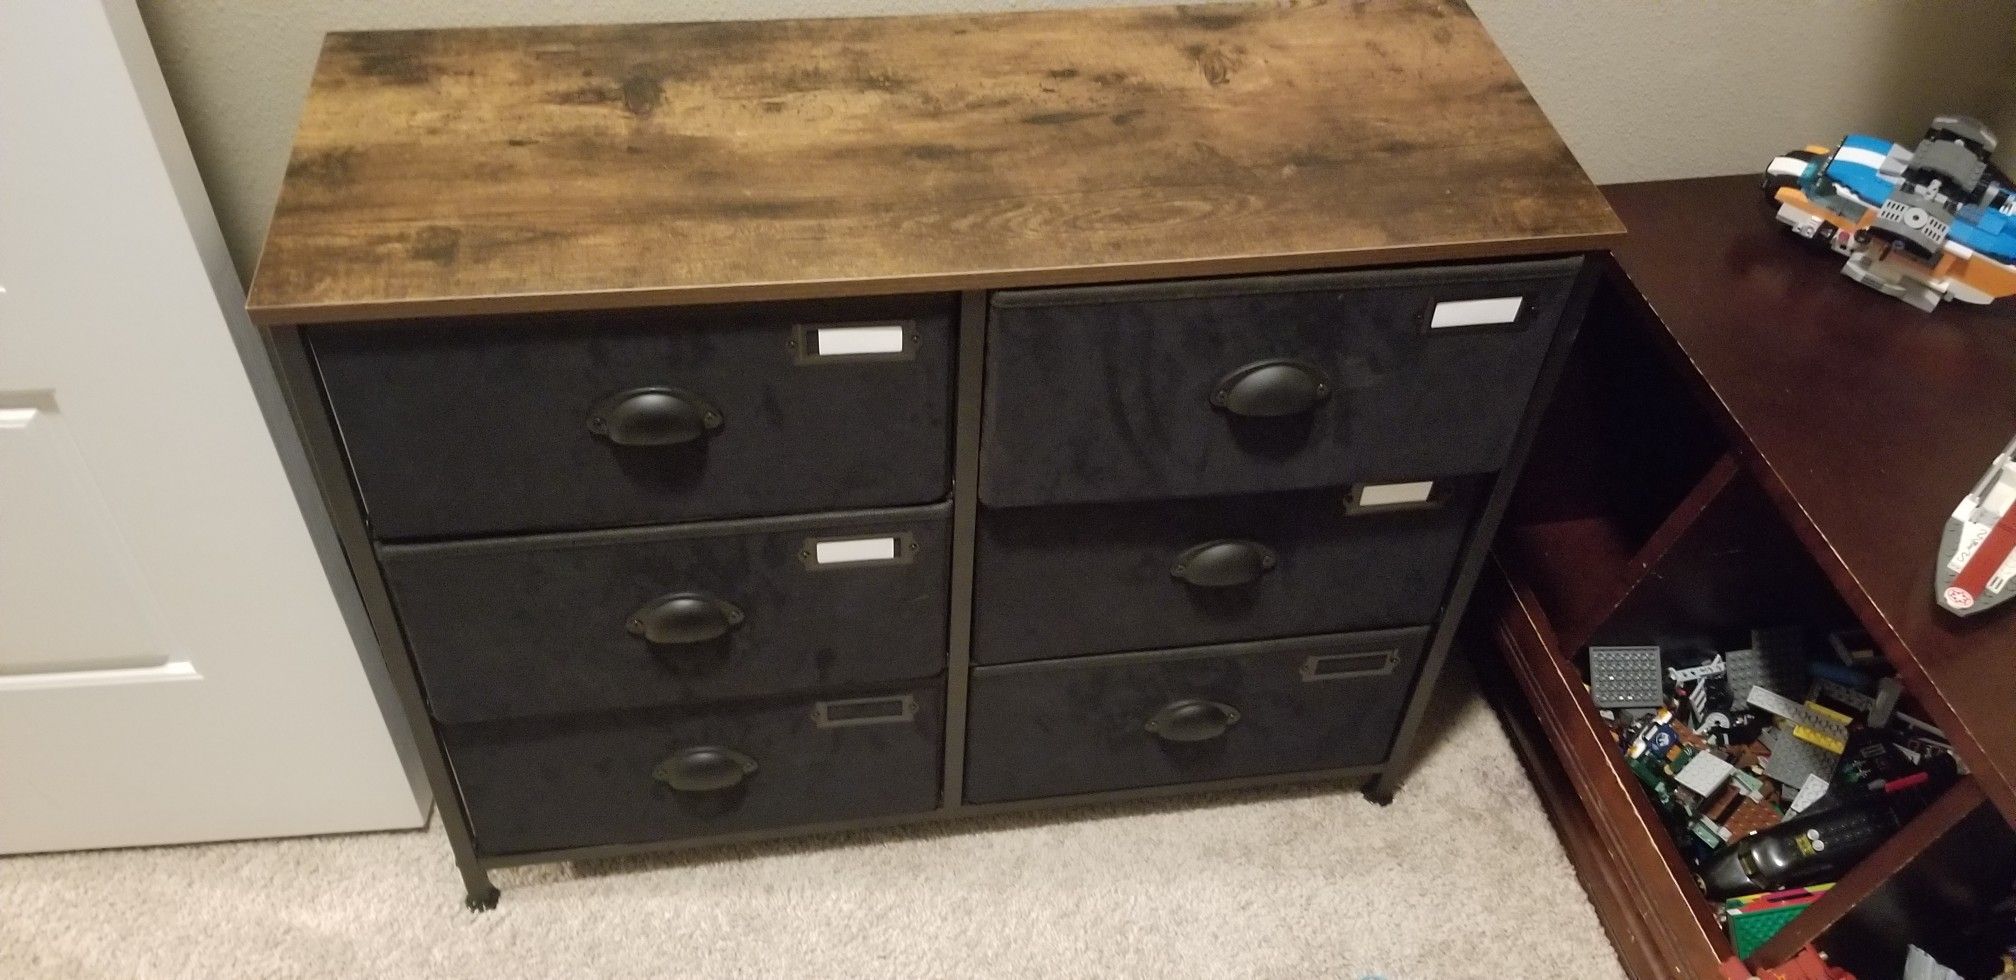 Organizer with drawers